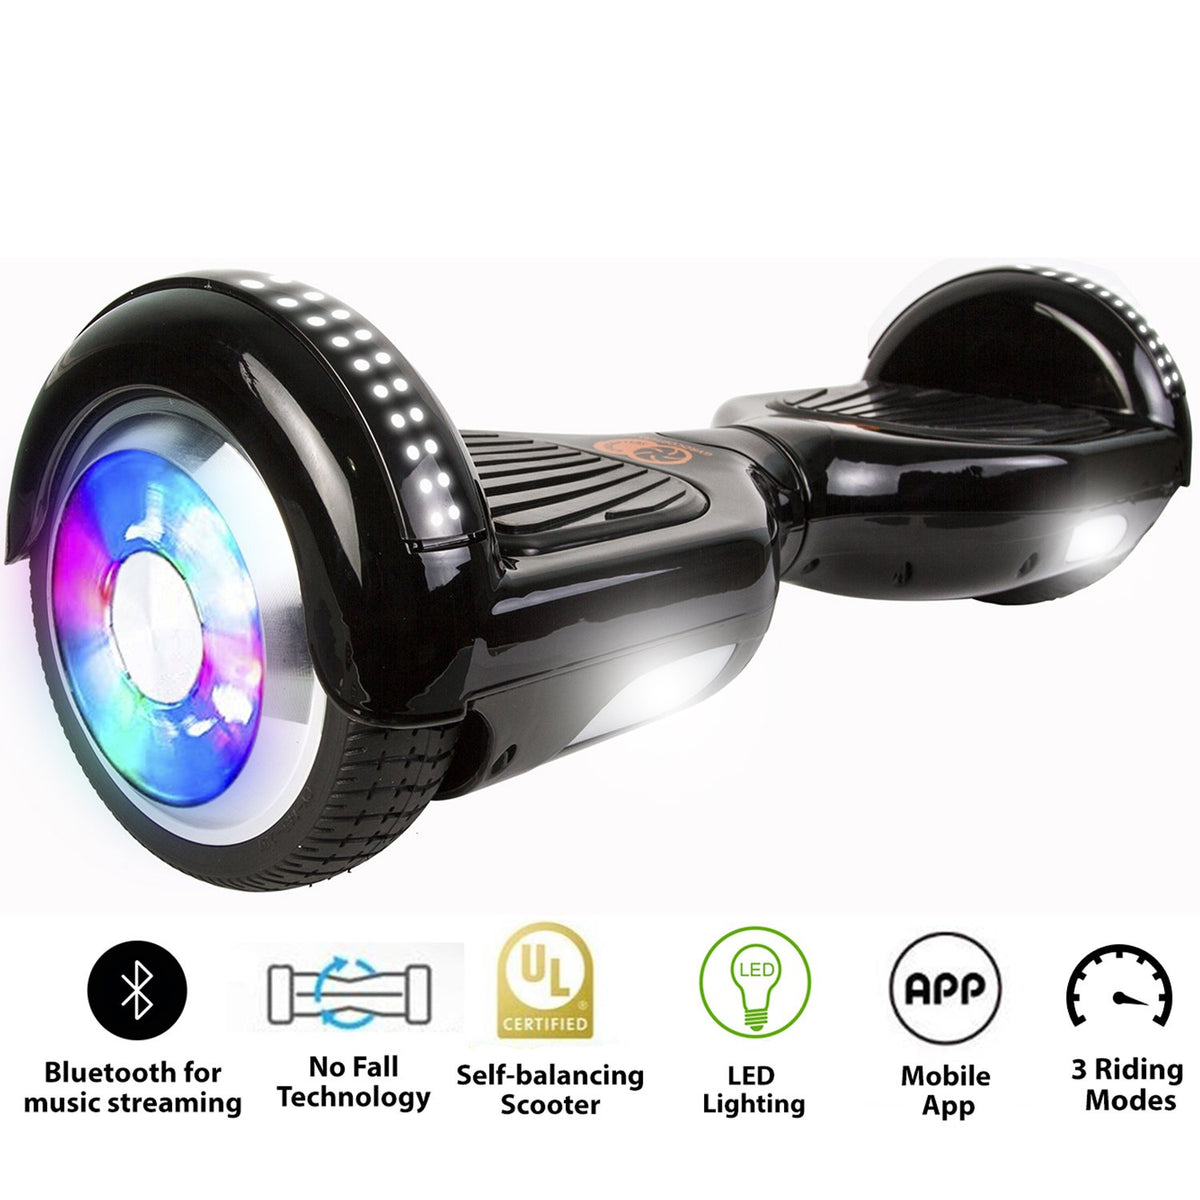 pro 4.0 hoverbaord, hooverboard, hoverboard spec, hoverboard features